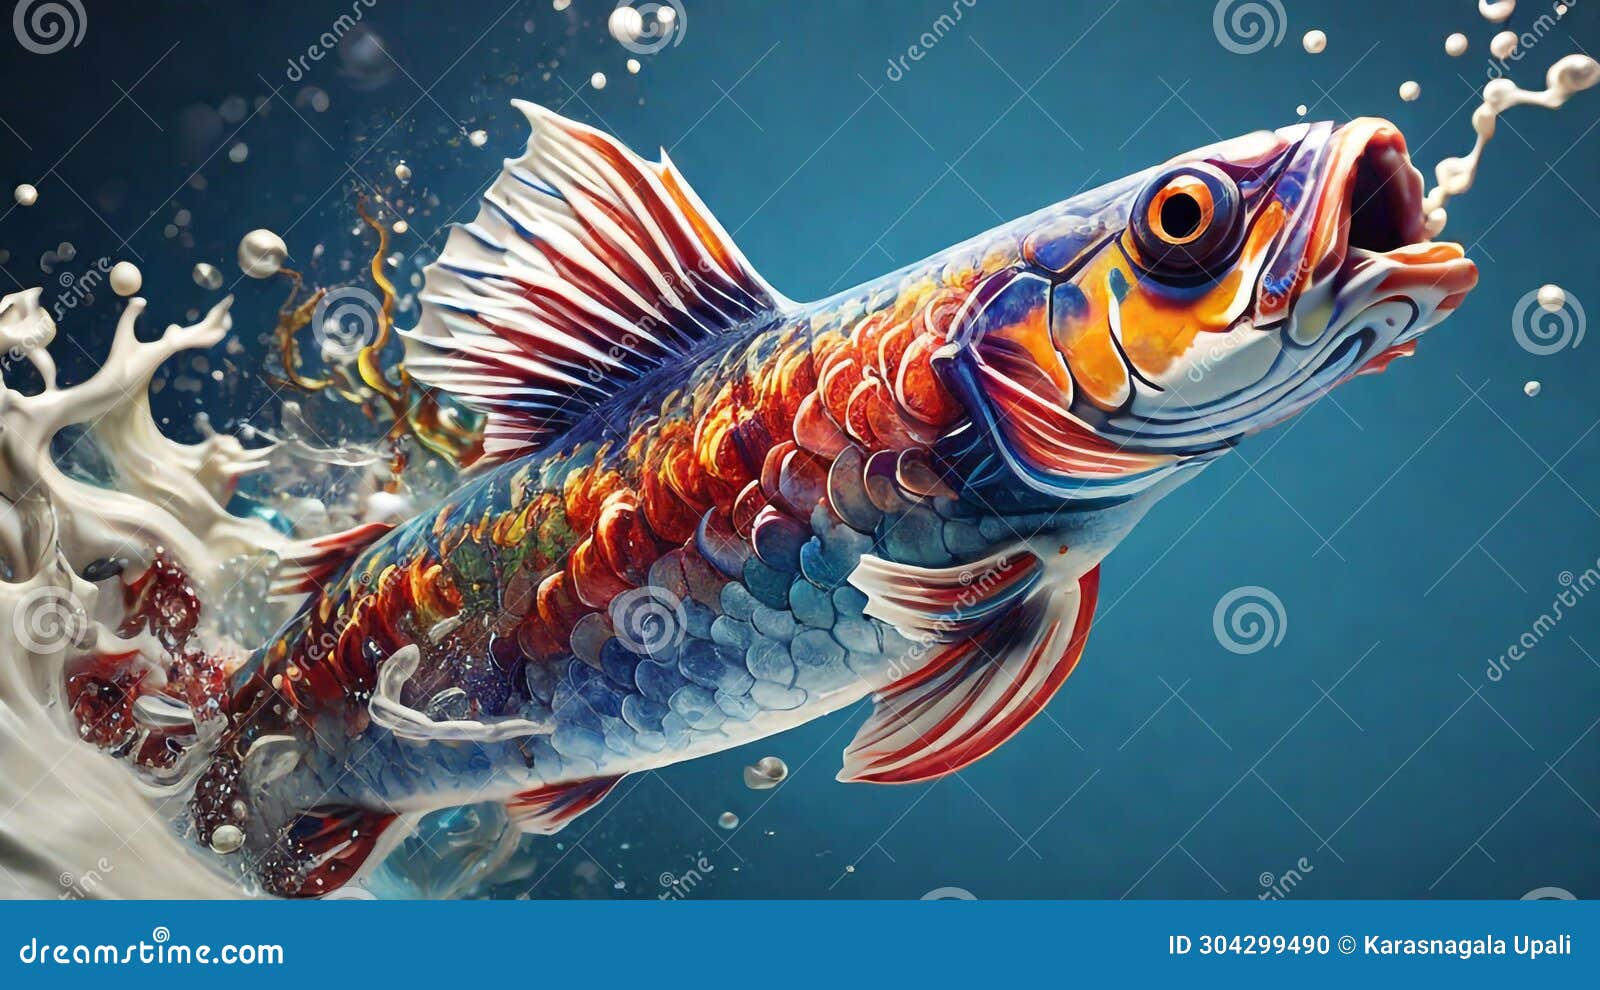 Majestic Fish Floating in Oceanic Bliss. Stock Illustration